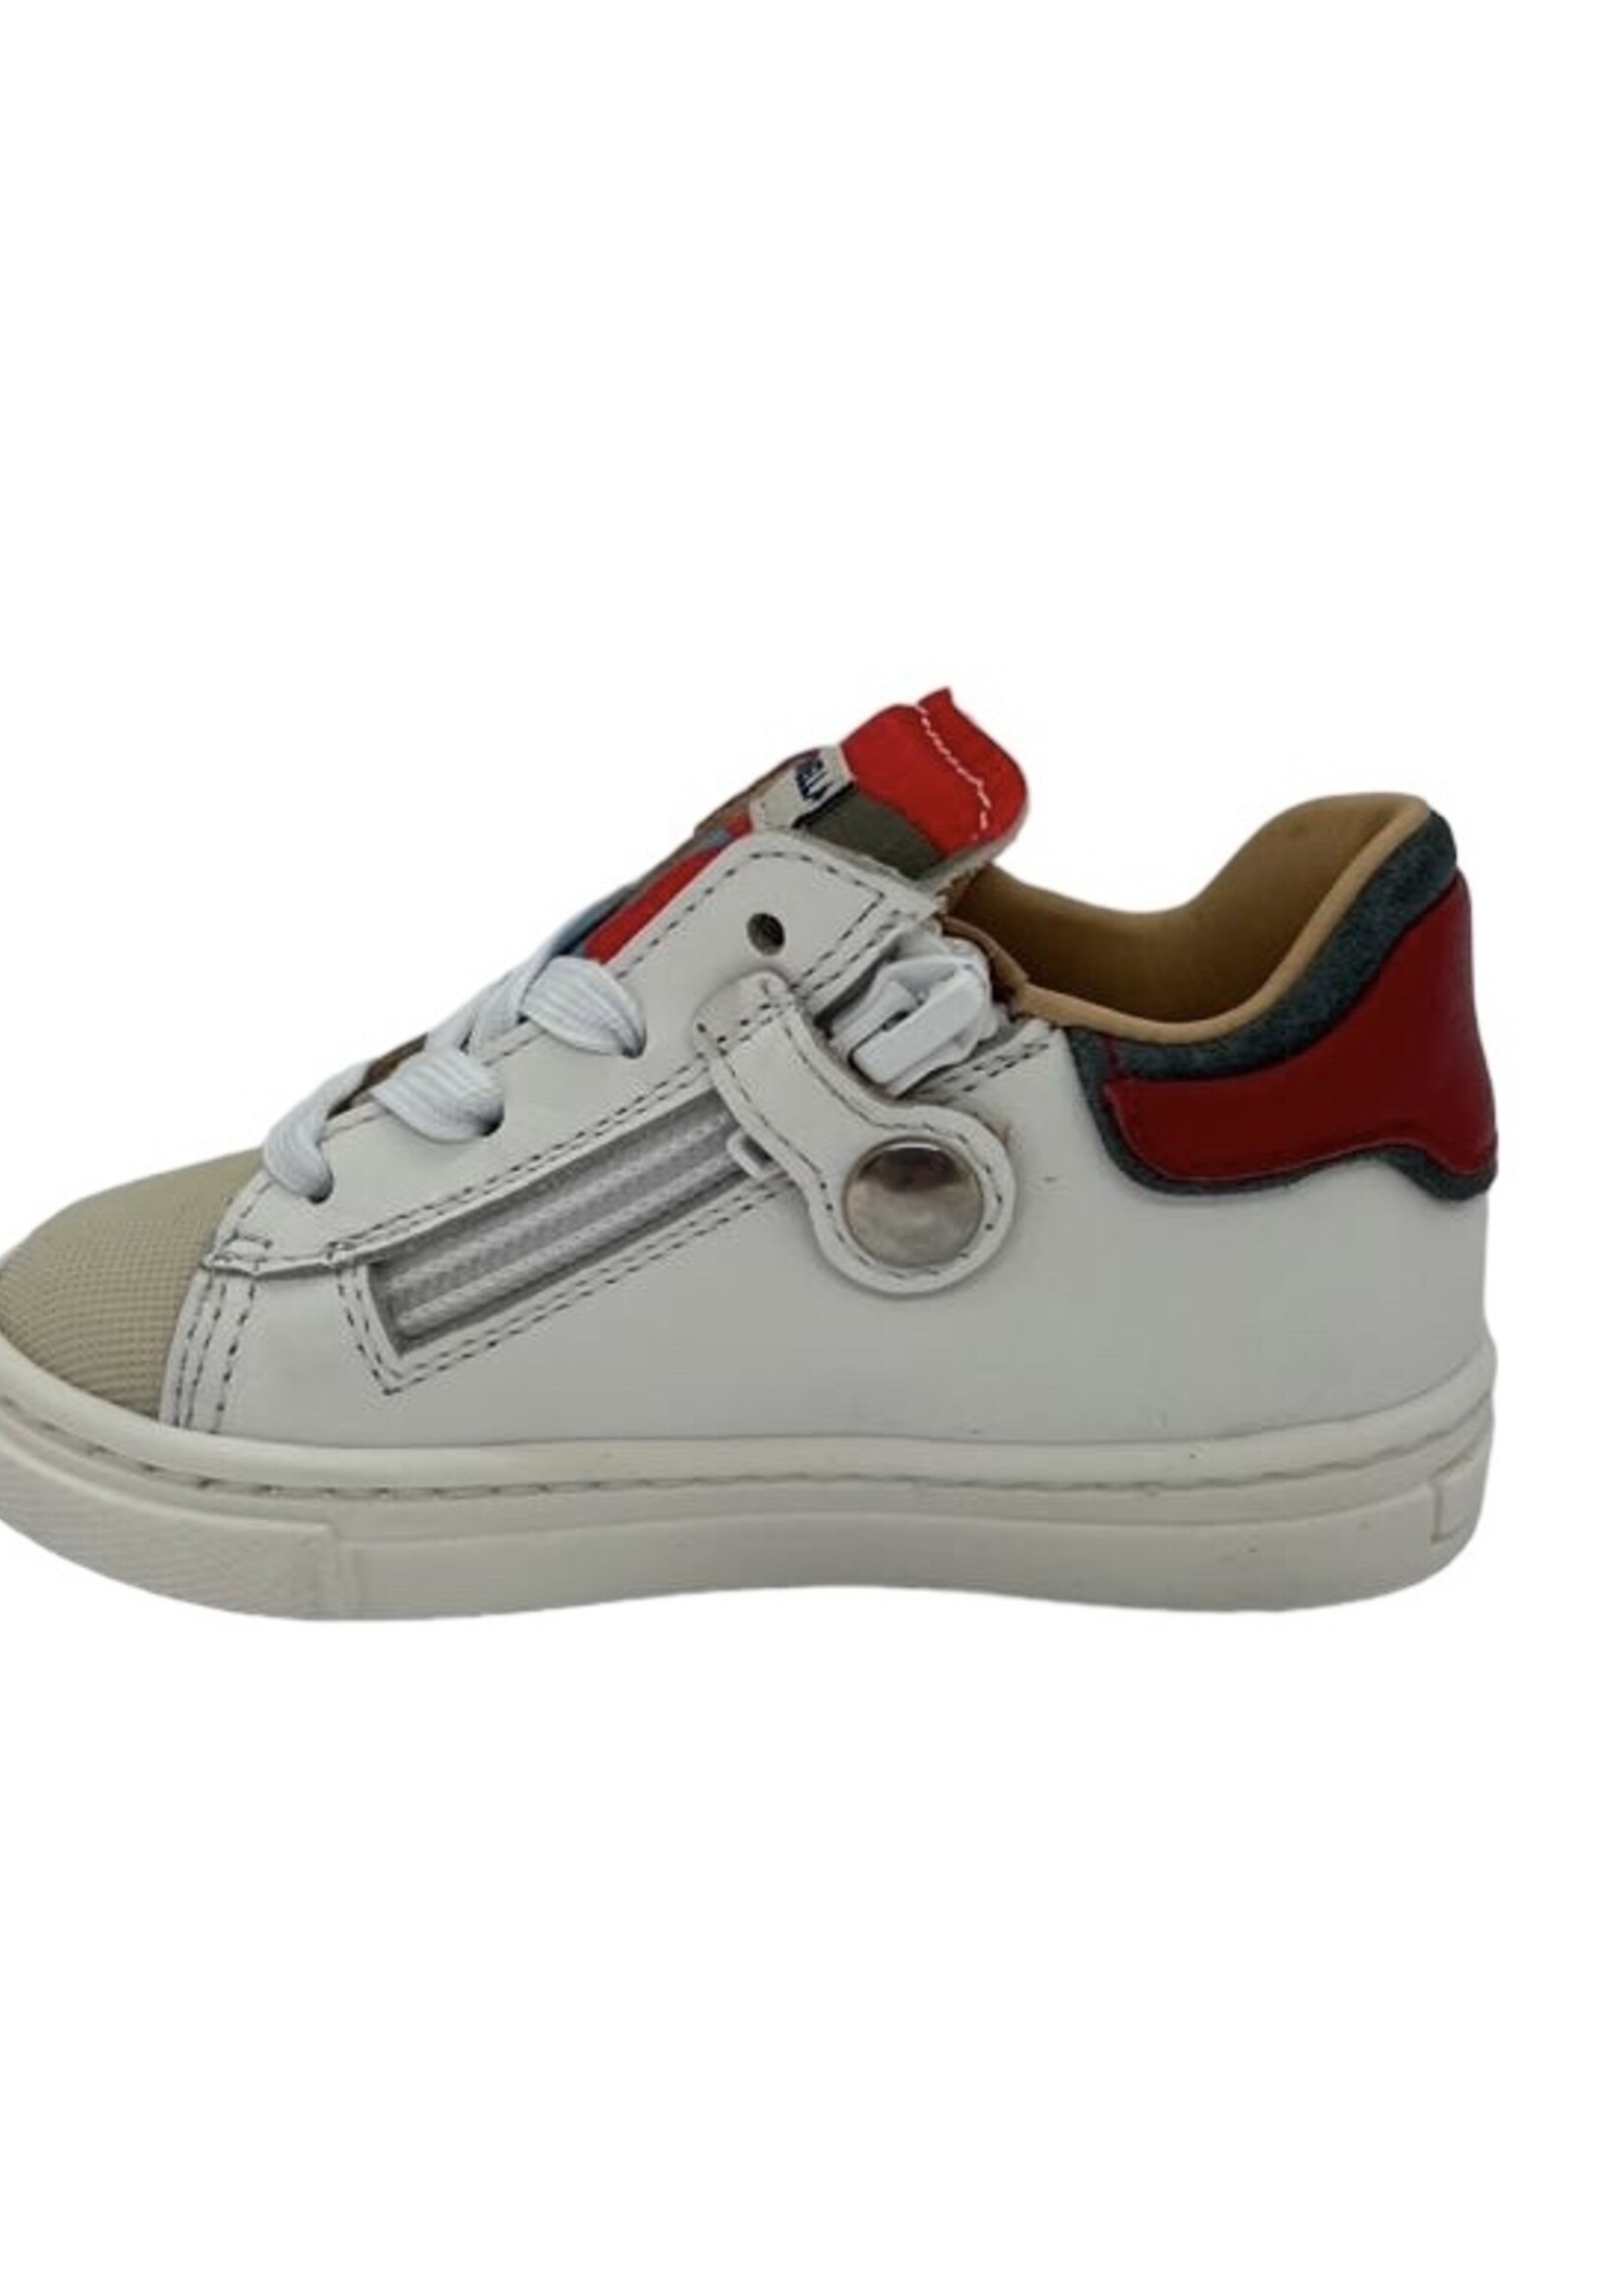 Rondinella 4771 sneaker wit rood